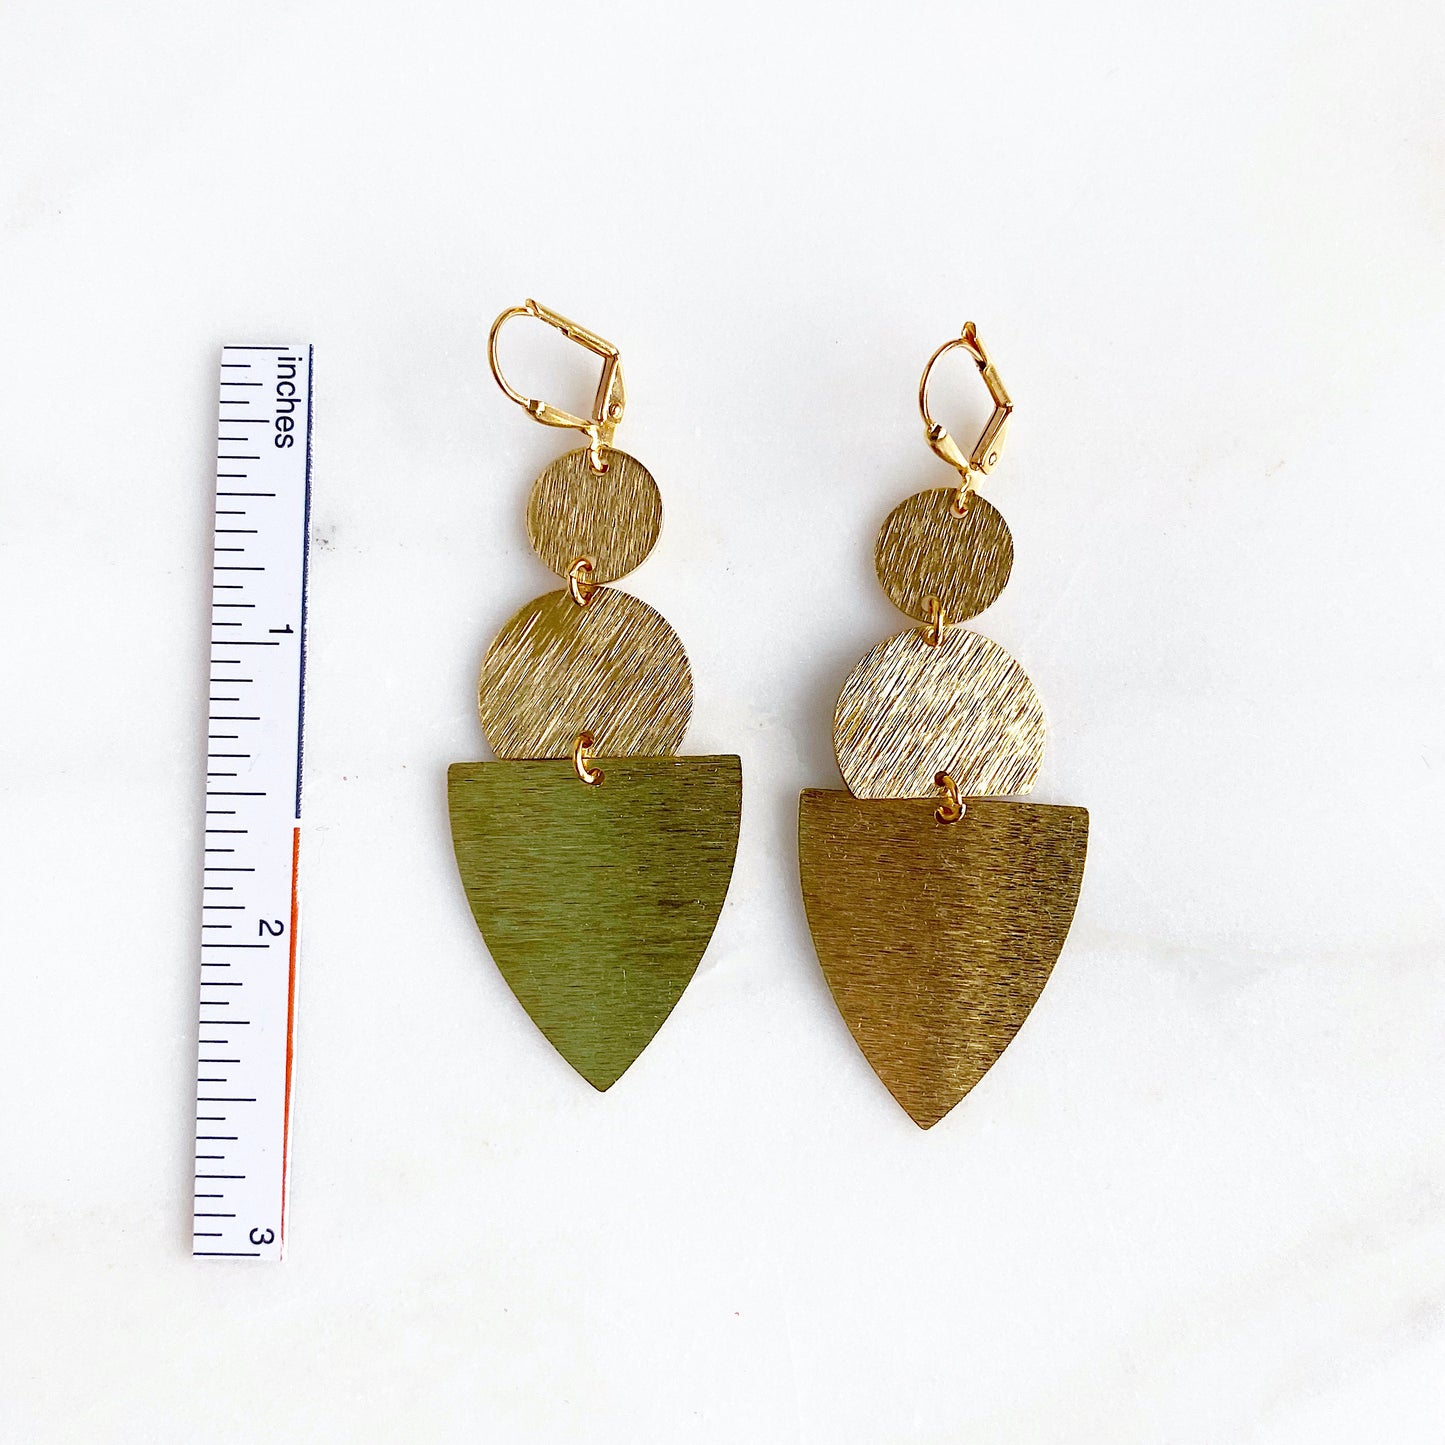 Geometric Statement Earrings in Brushed Gold